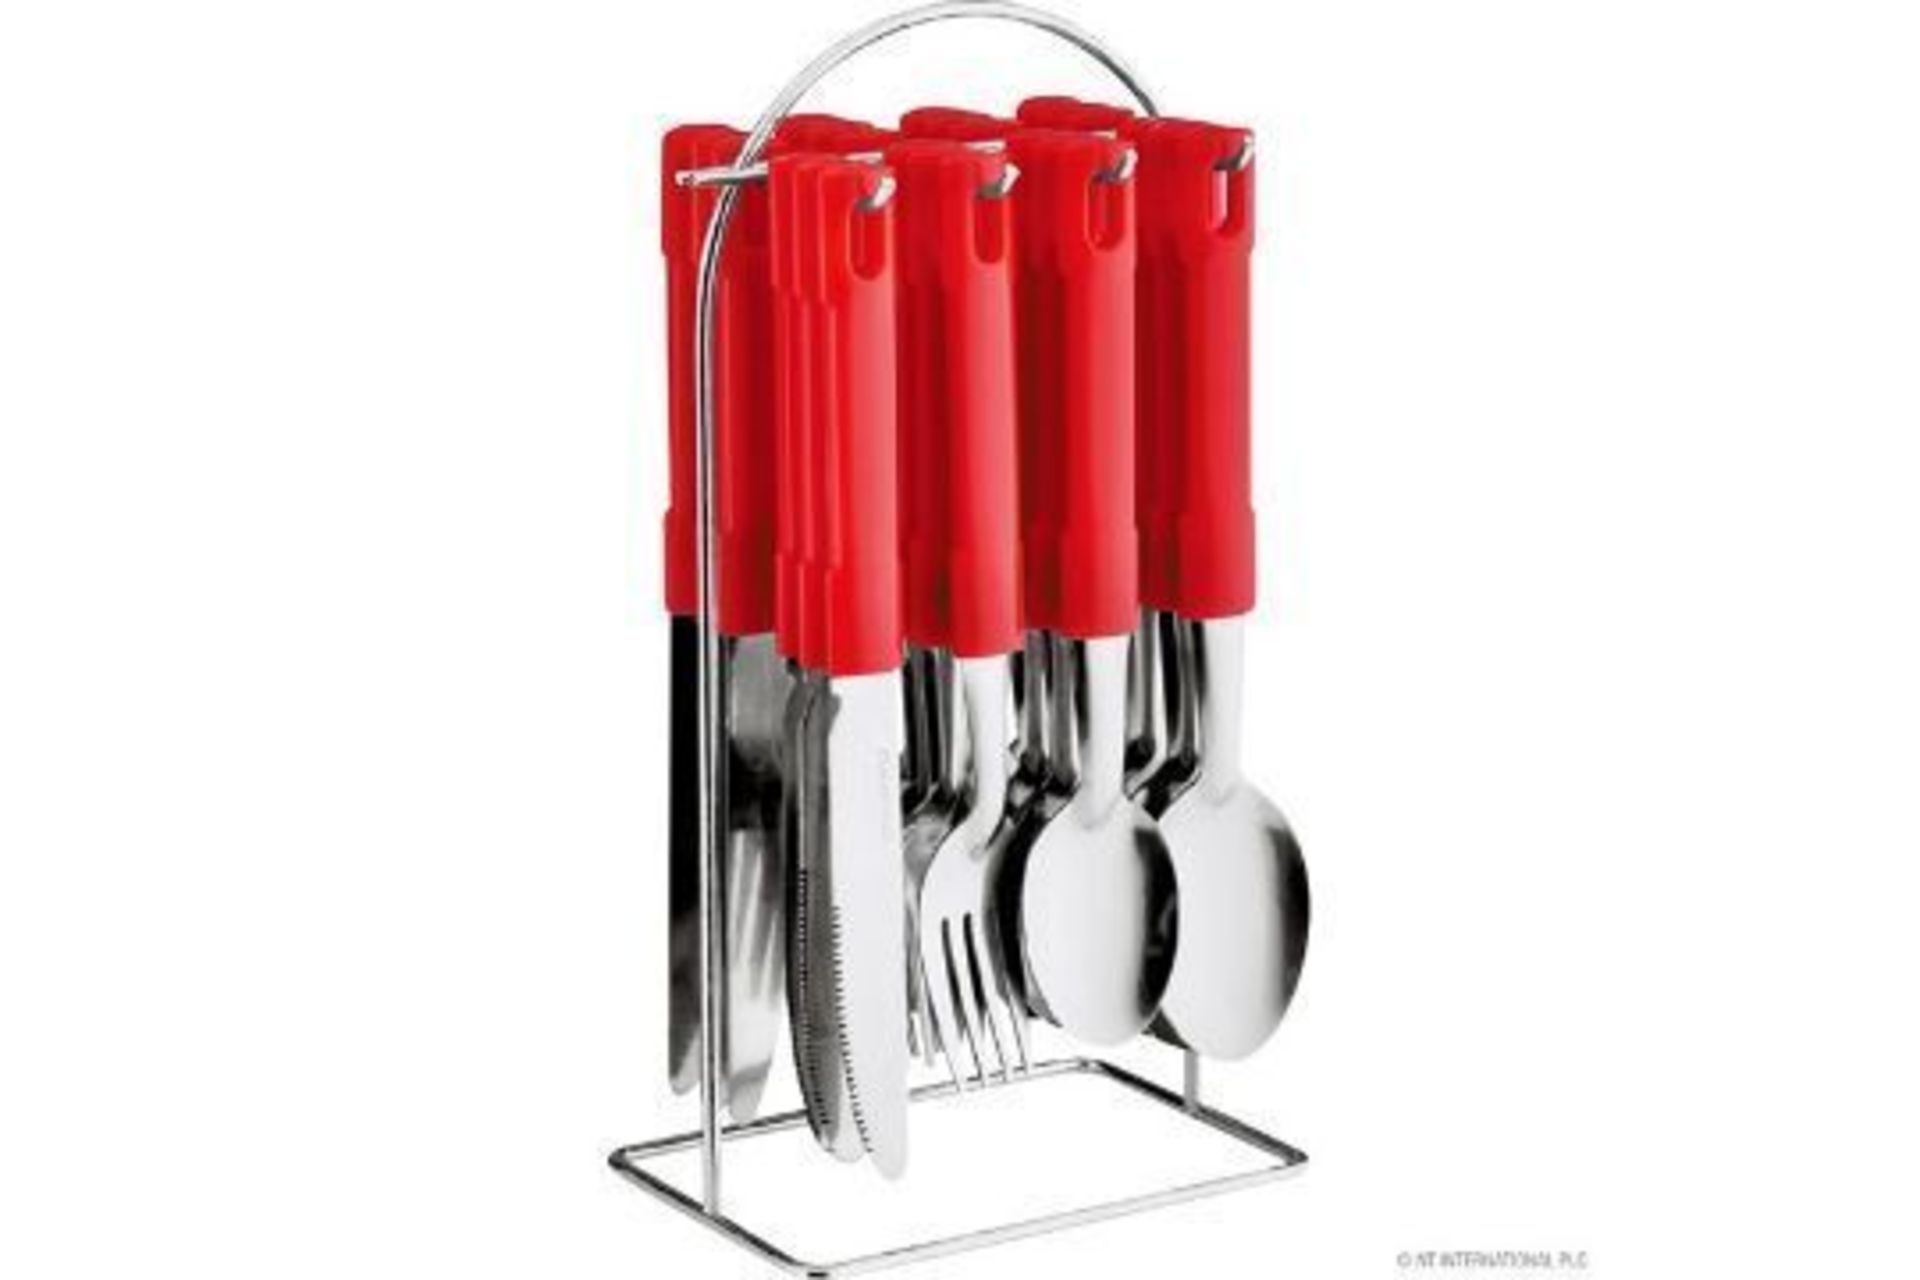 New Red 24pc S/S Cutlery Set with Metal Stand